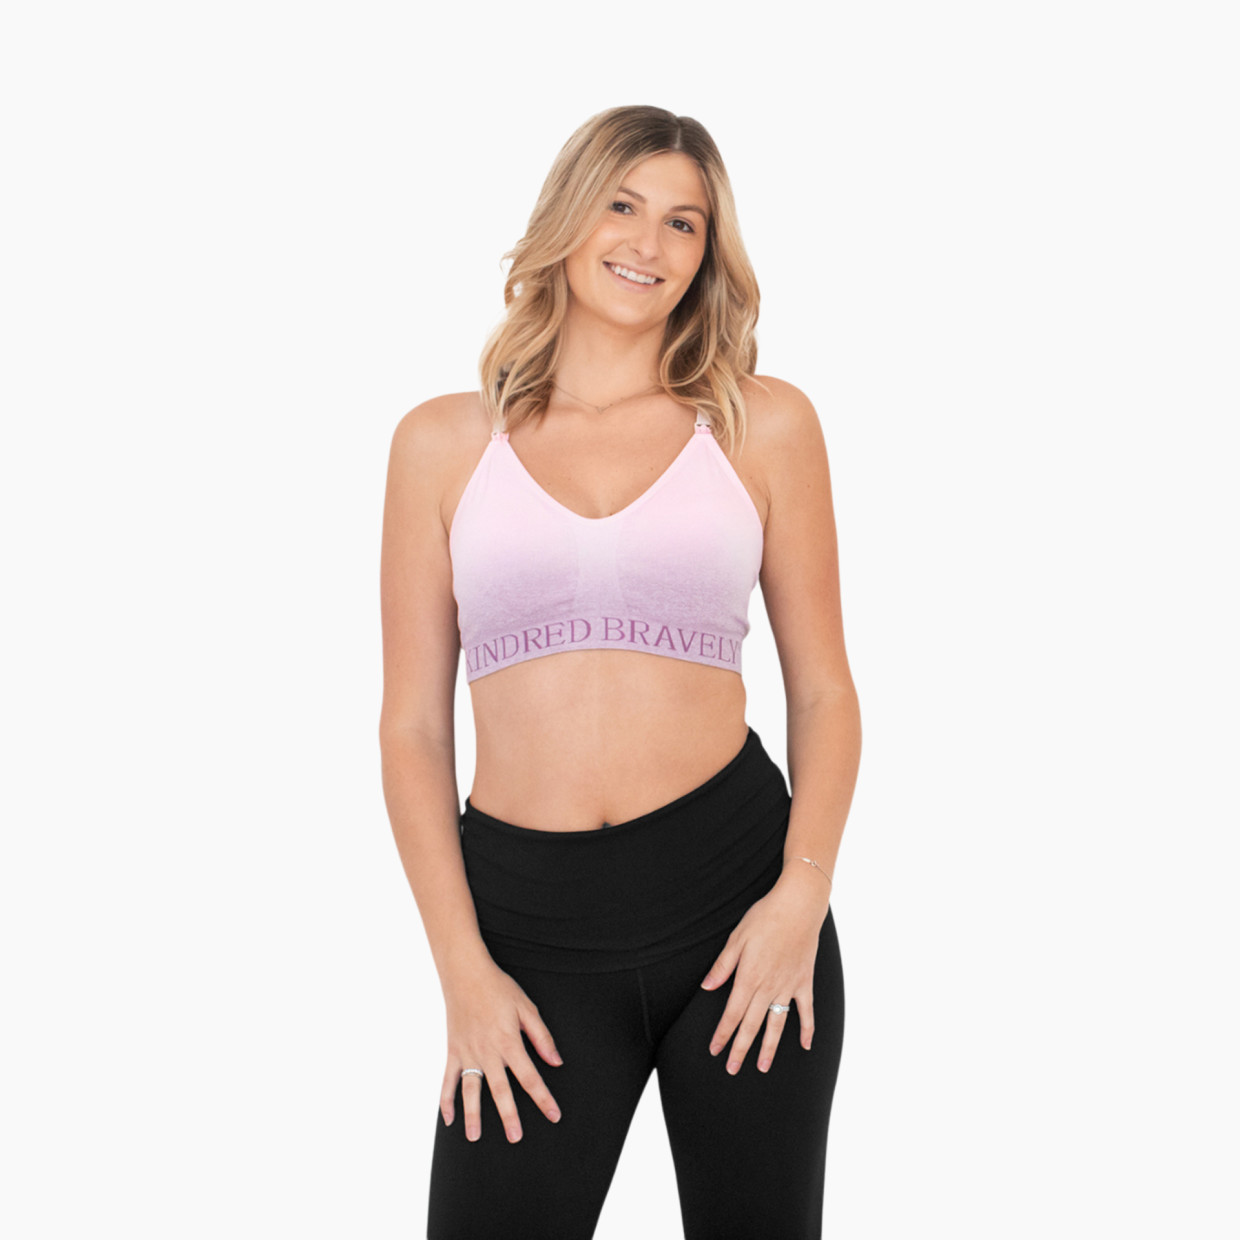 Kindred Bravely Sublime Hands-Free Pumping & Nursing Sports Bra - Ombre Purple, Large.